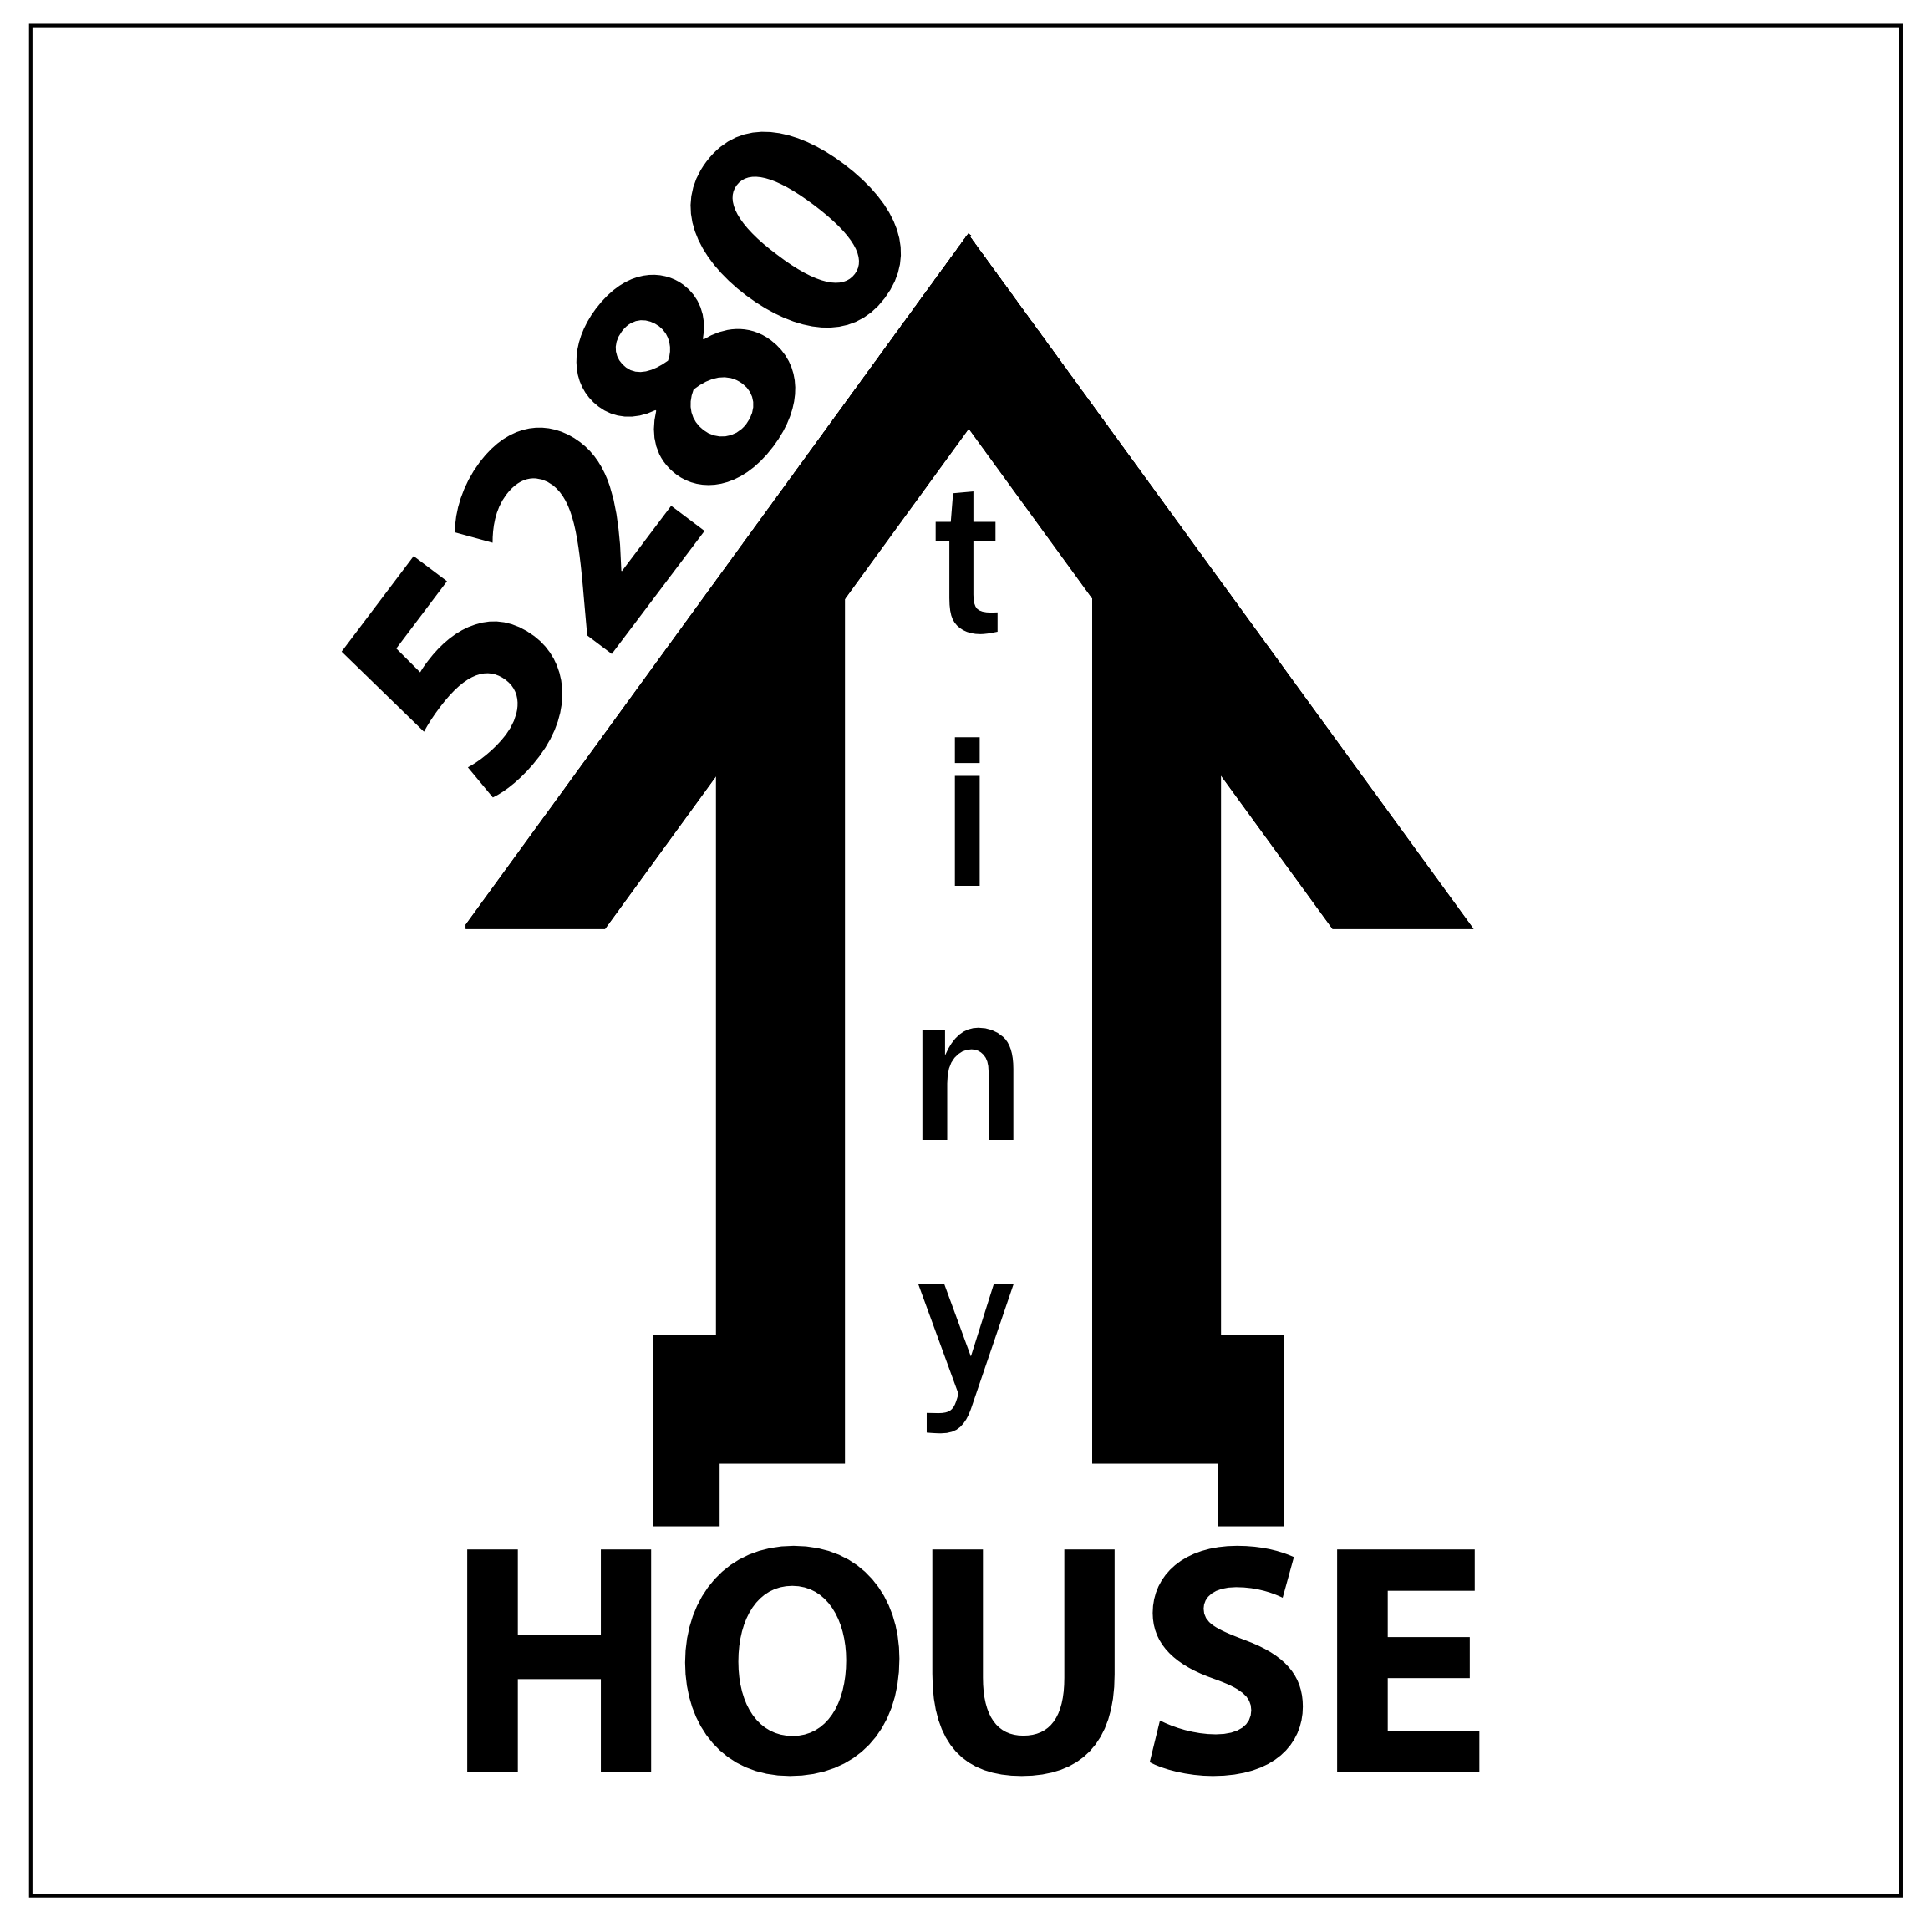 Follow my journey to build my Tiny House in Colorado. 
Mile High Living in a small space.